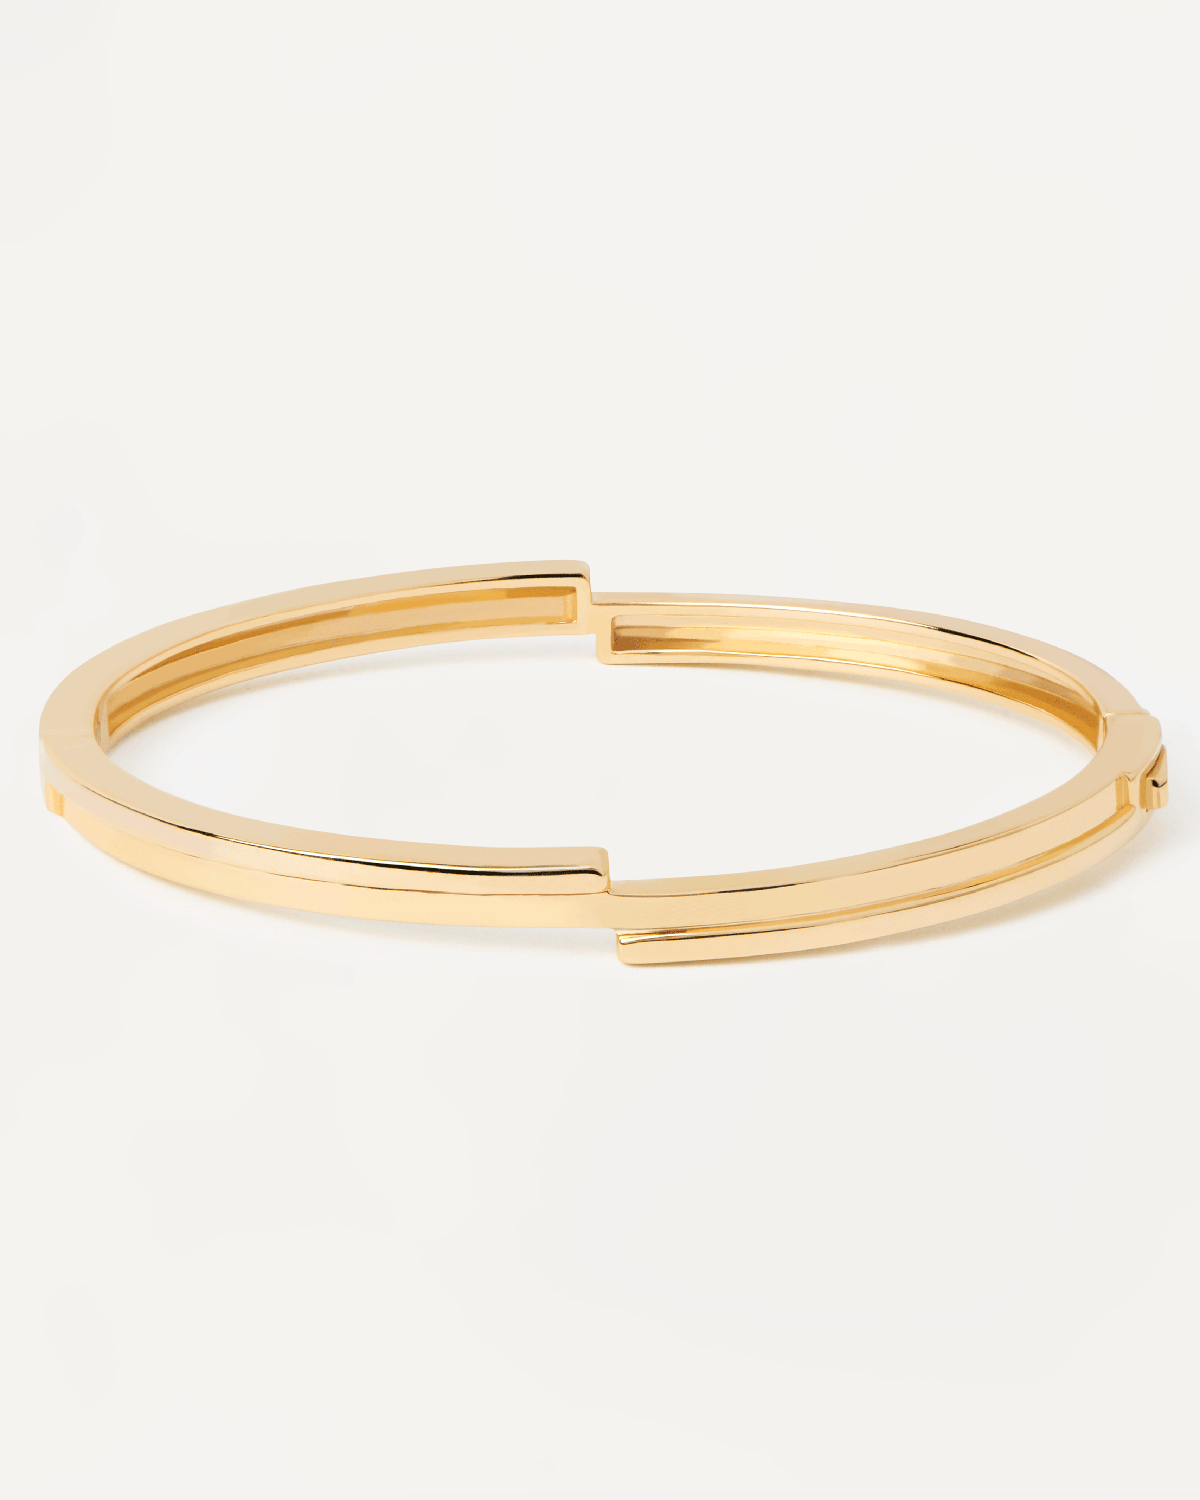 2023 Selection | Genesis Bangle. Hinged rigid bracelet with asymetric design in gold-plated silver. Get the latest arrival from PDPAOLA. Place your order safely and get this Best Seller. Free Shipping.